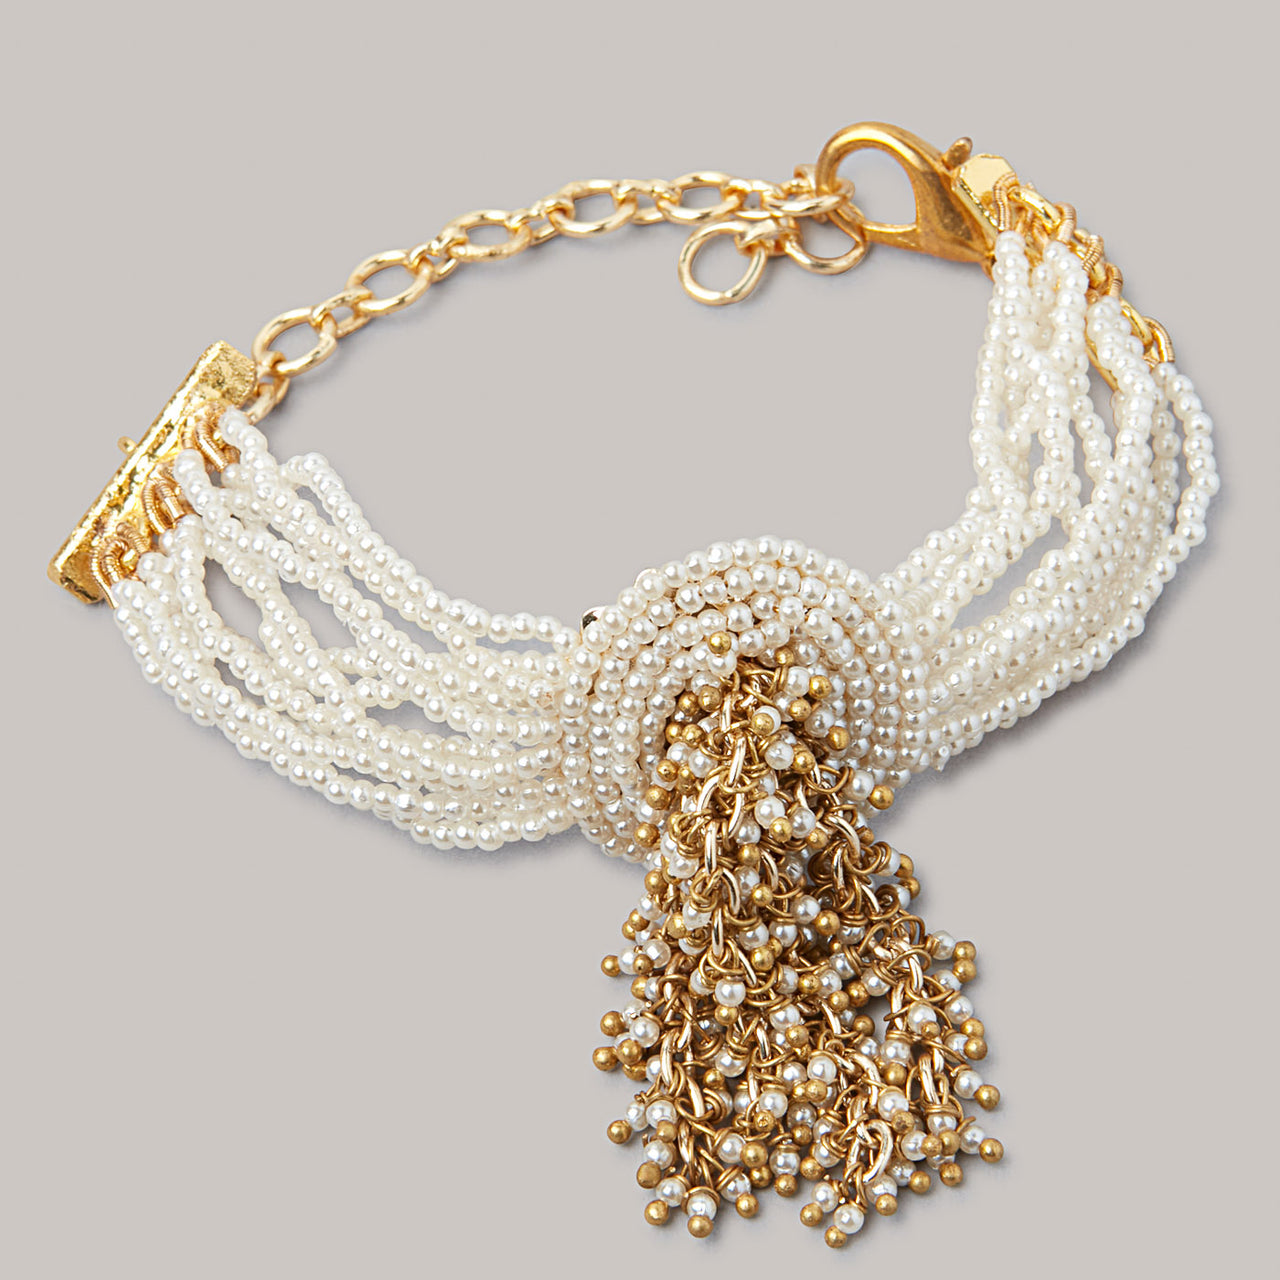 Golden Real Pearl Necklace with Pendant - Pearl Jewelry - Apearl